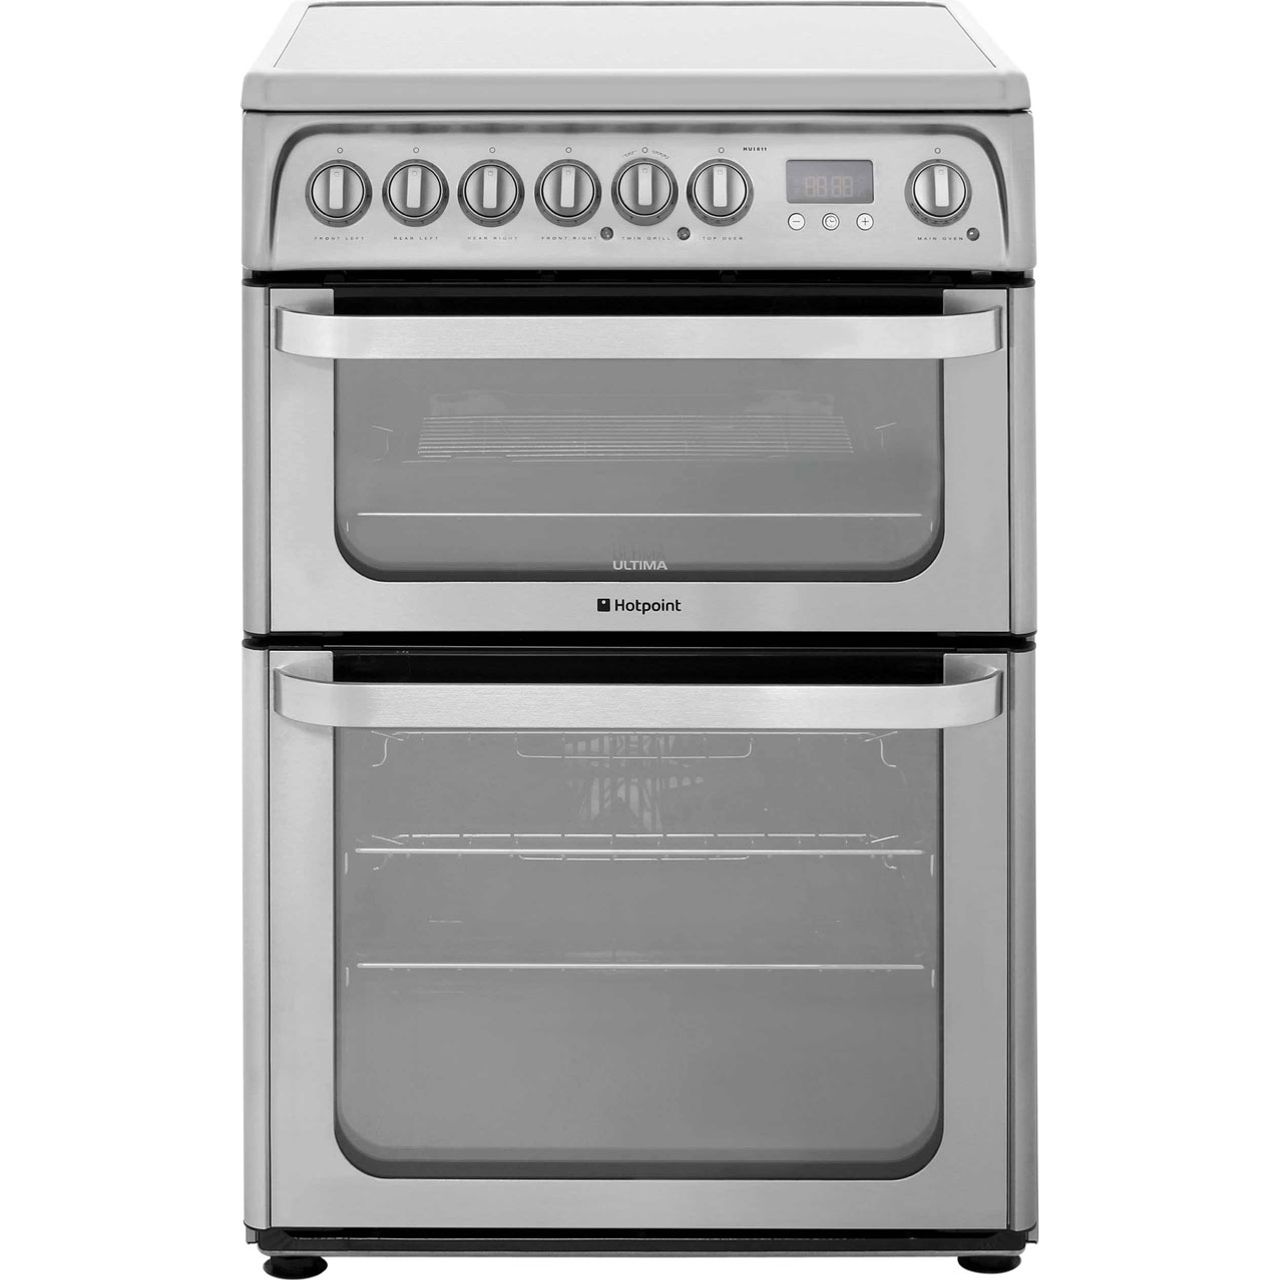 Hotpoint Ultima HUI611X Free Standing Cooker in Stainless Steel